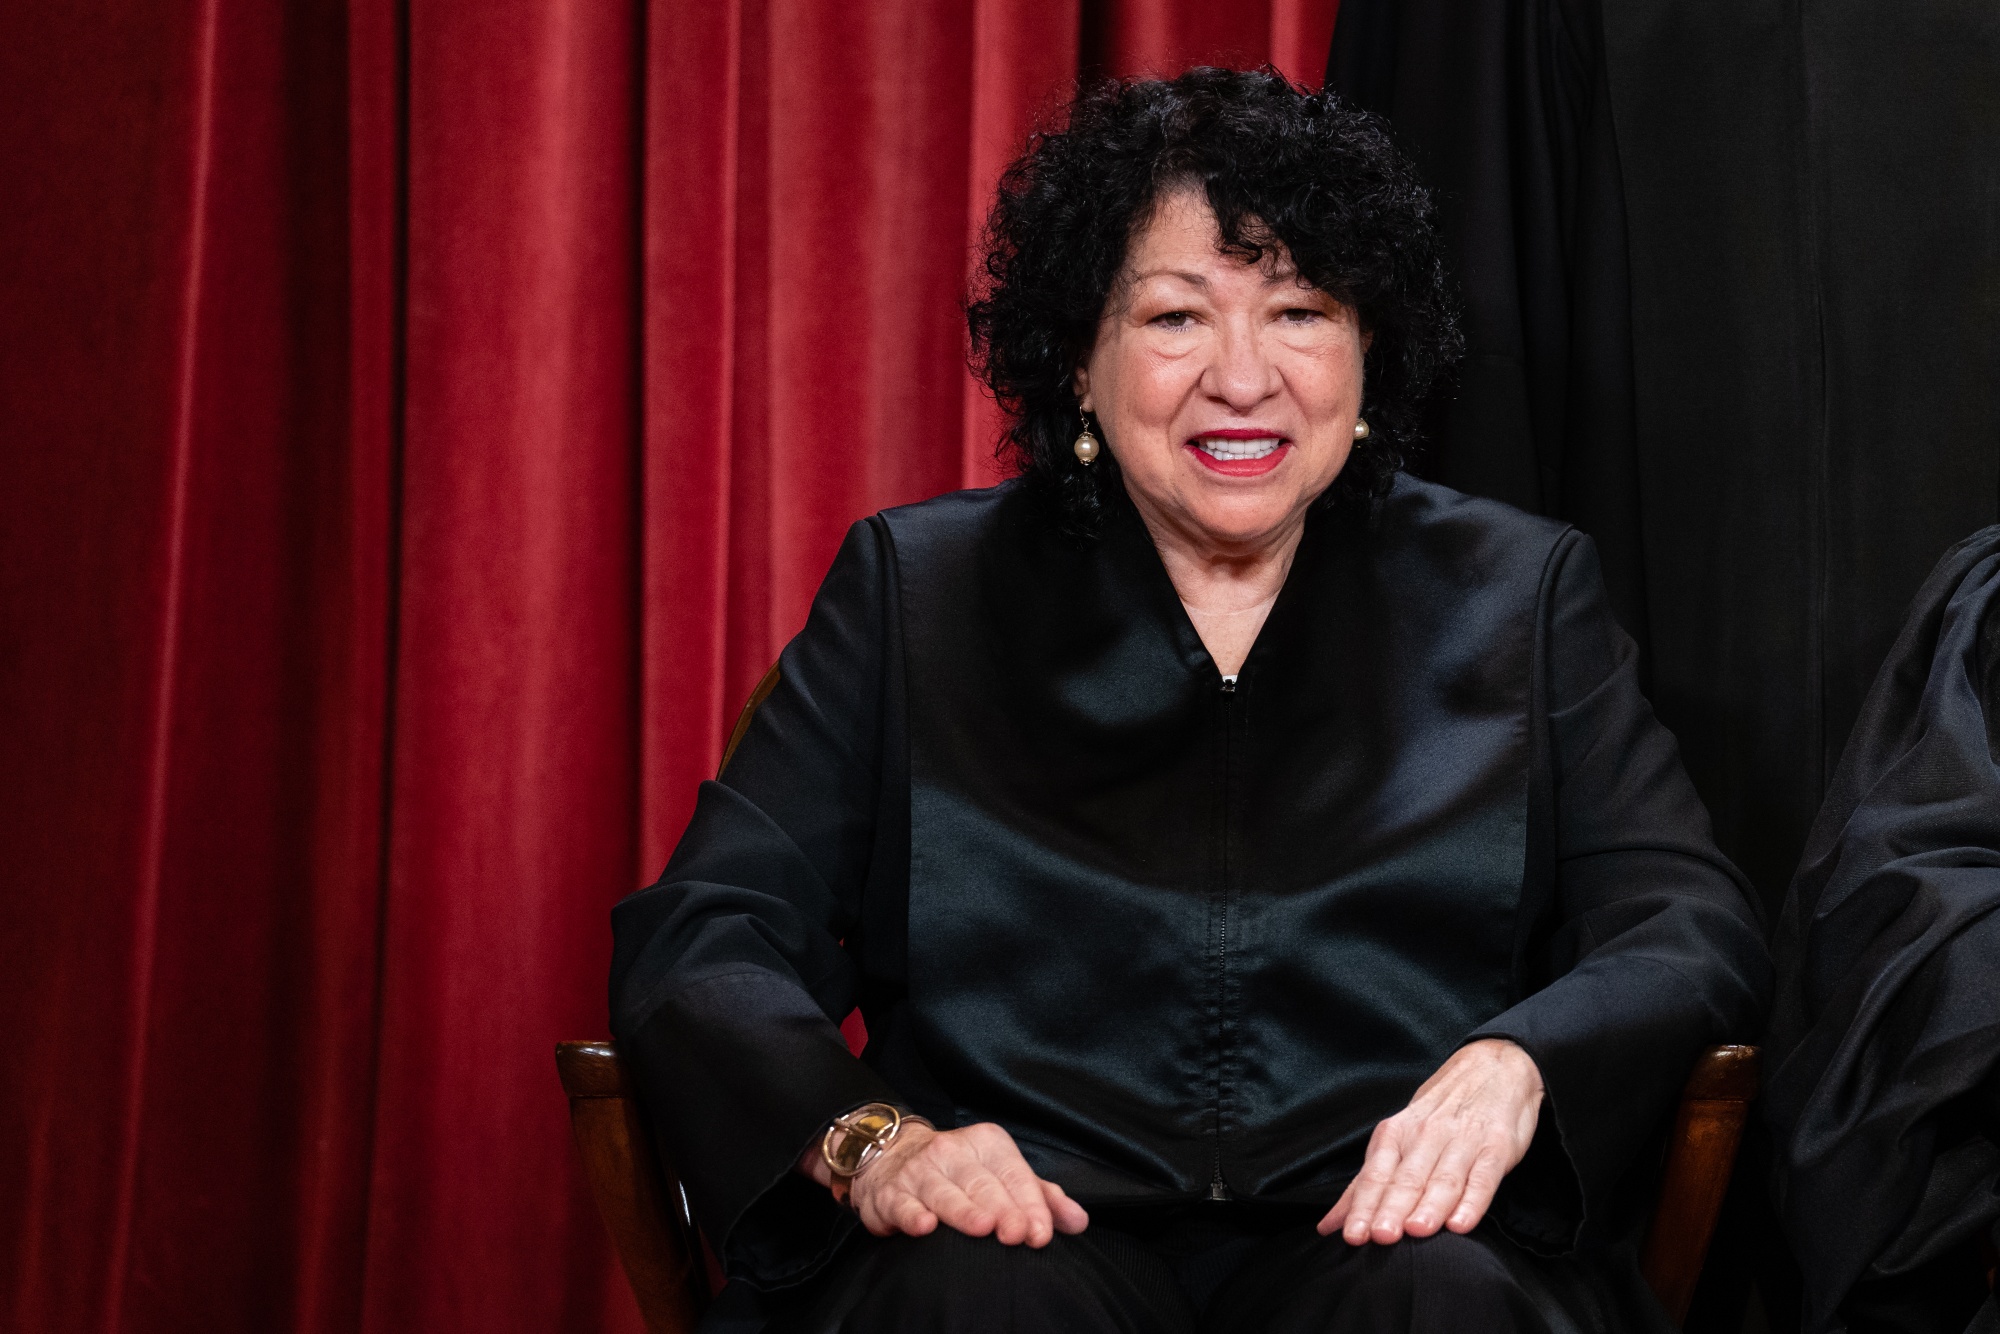 Sonia Sotomayor Asks If Same-Sex Wedding Website Ban Affects Interracial Unions